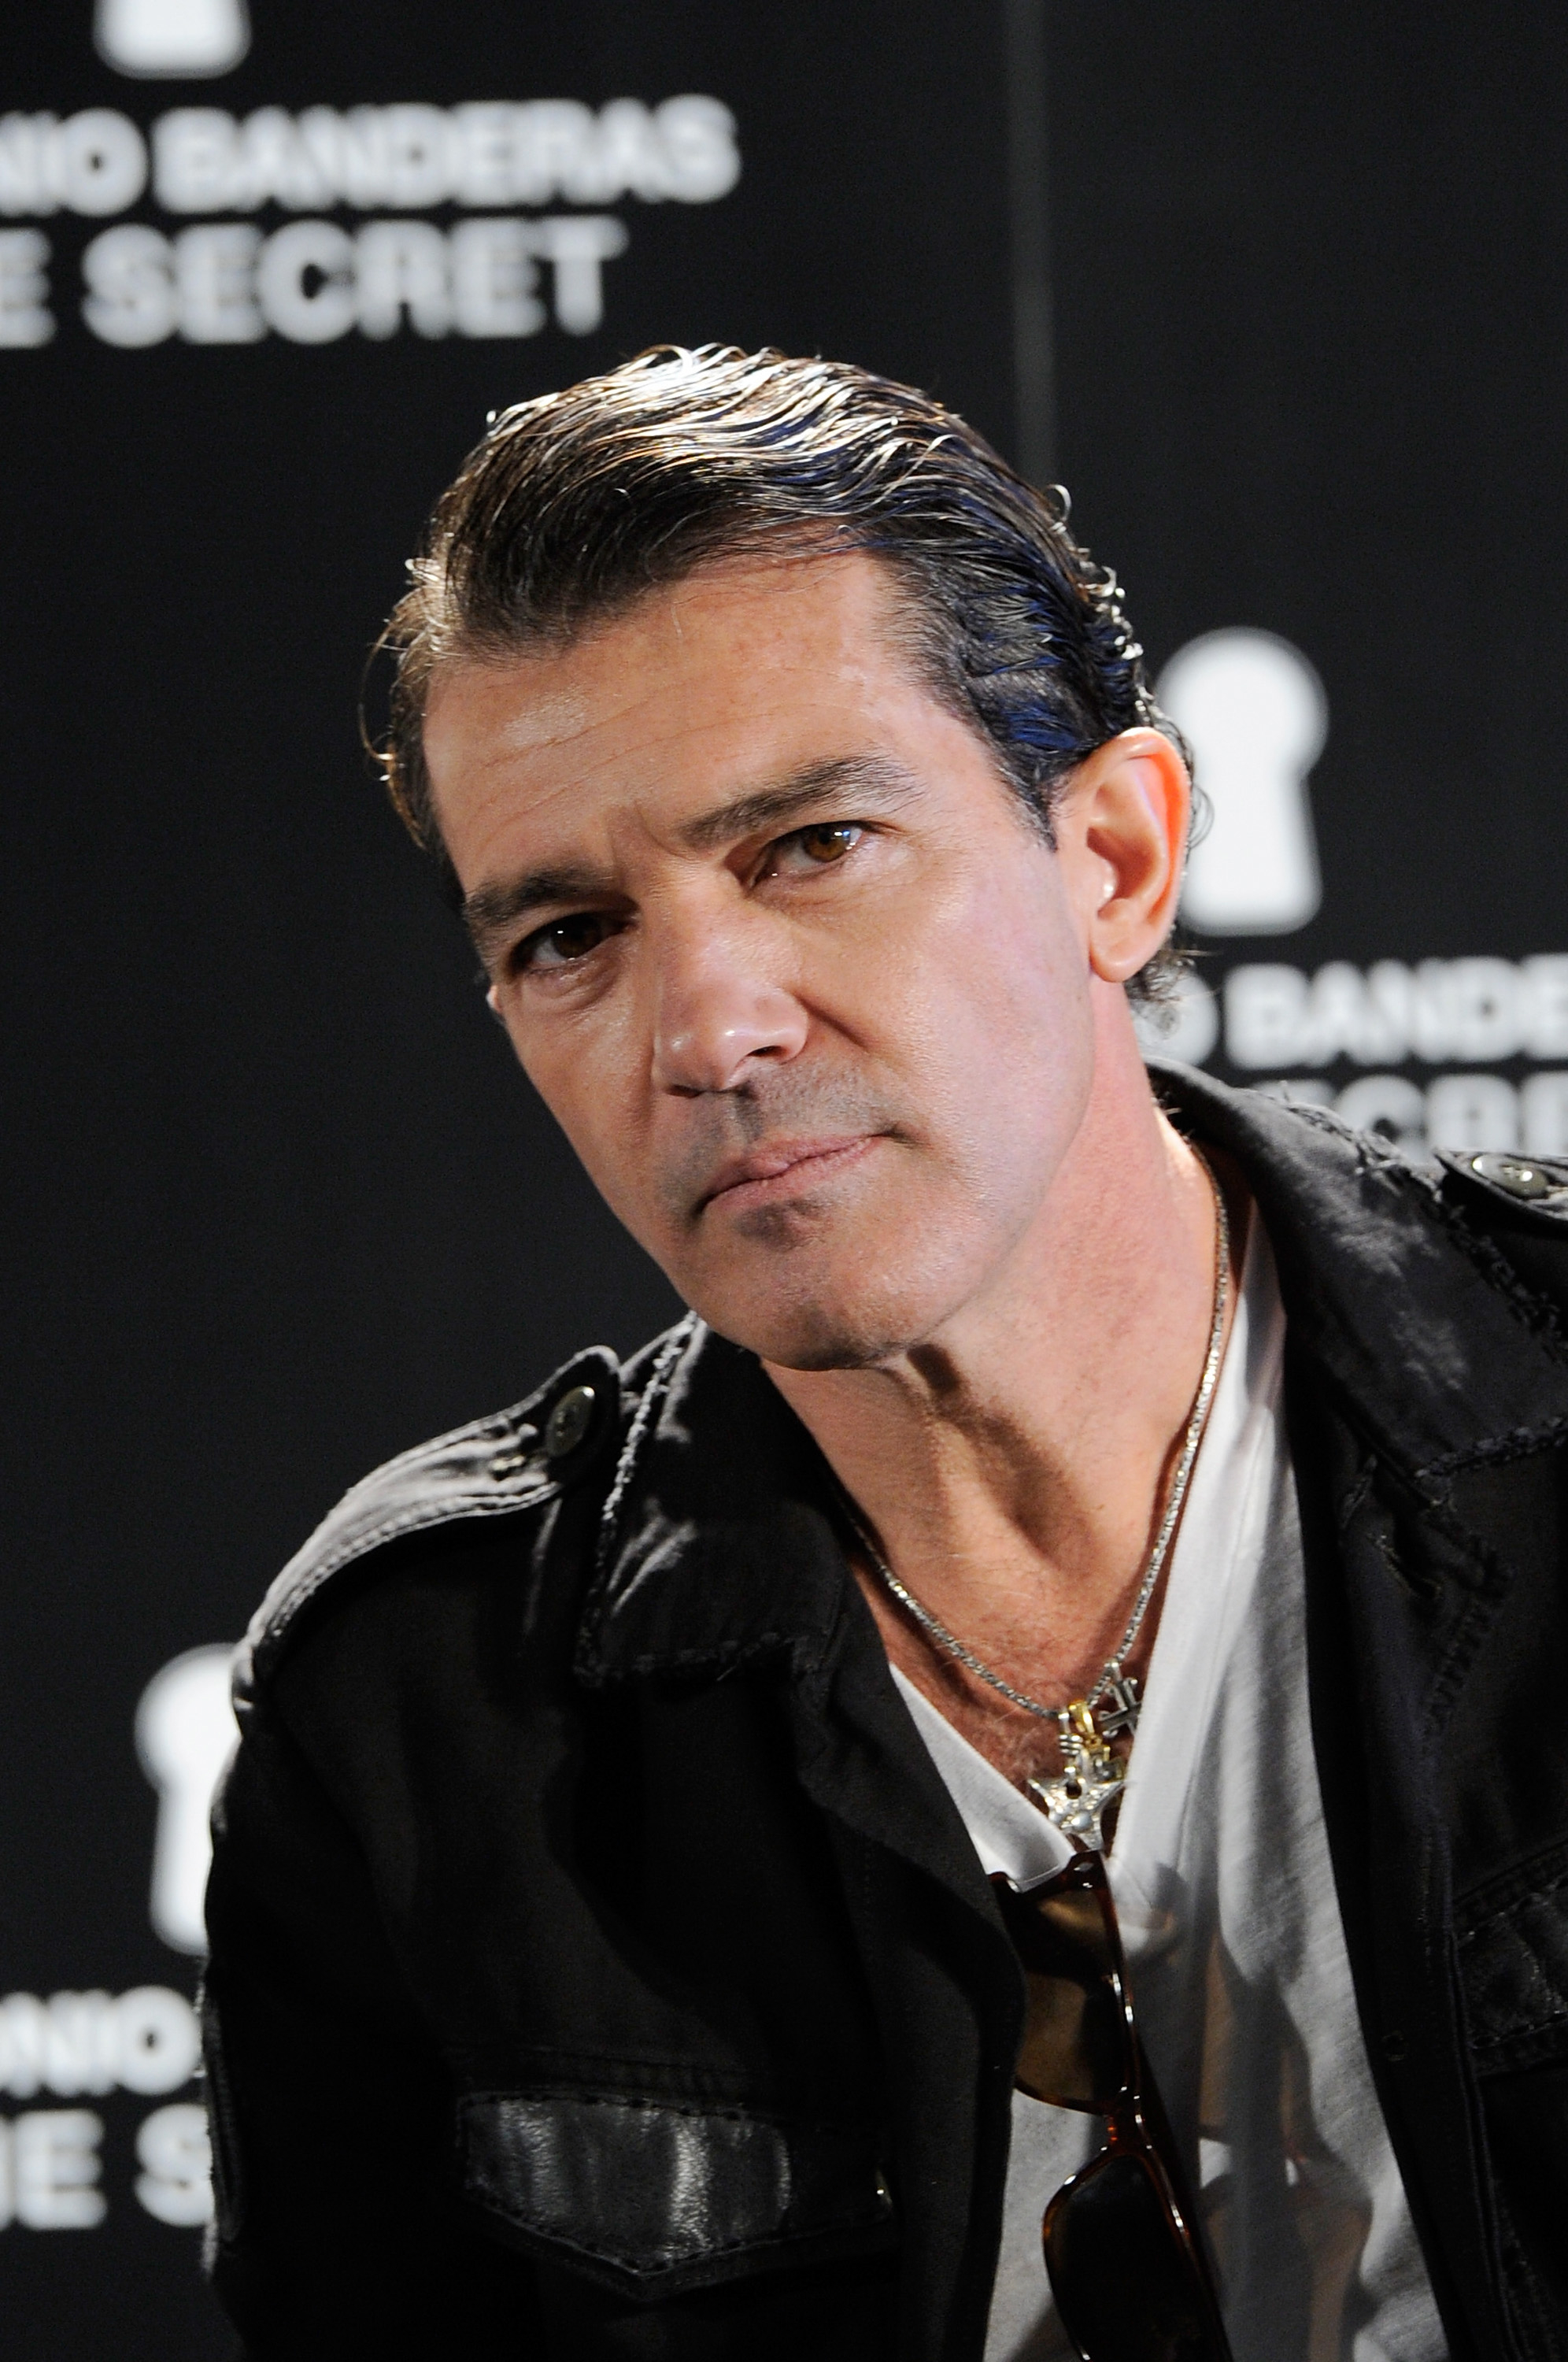 Antonio Banderas in leather jacket over a shirt, at a promotional event